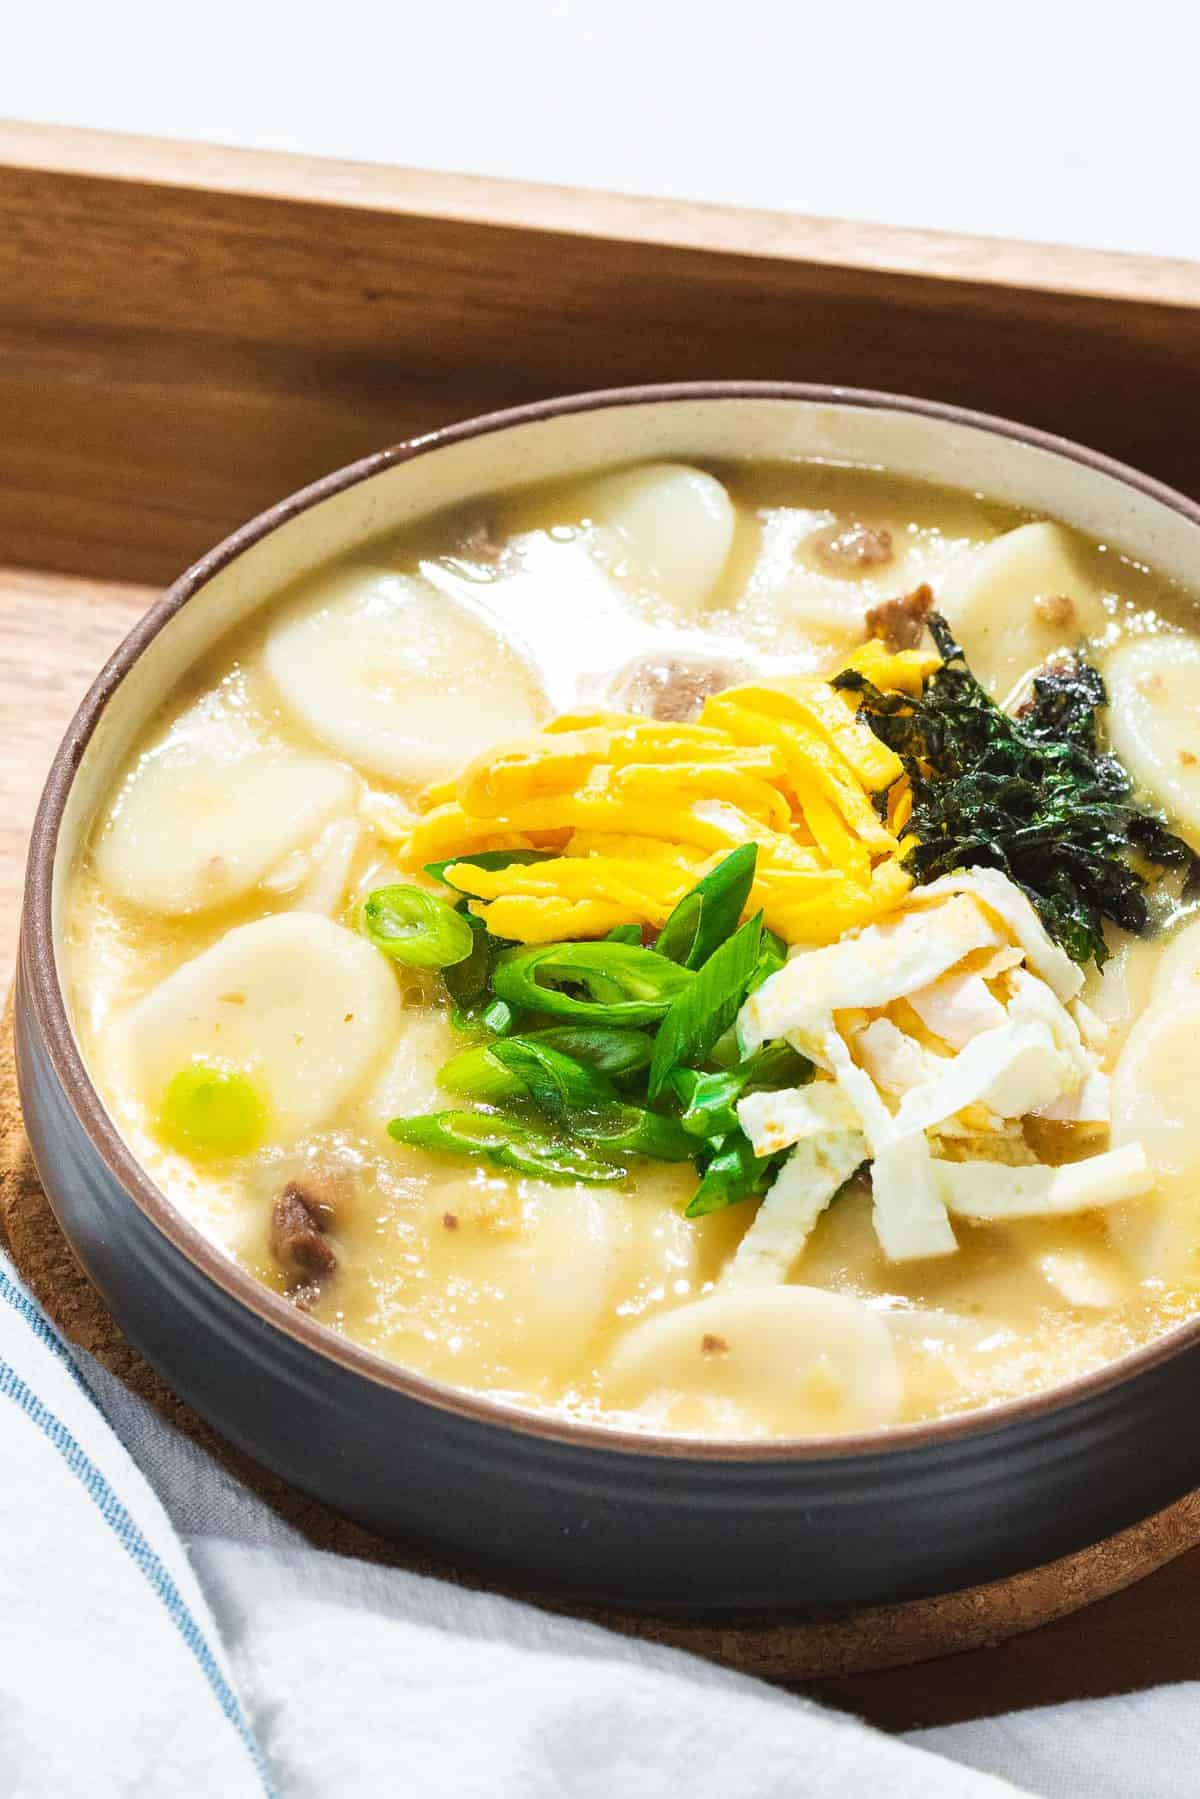 Tteokguk made with Korean rice cakes and beef broth garnished with eggs, gim, and scallions.